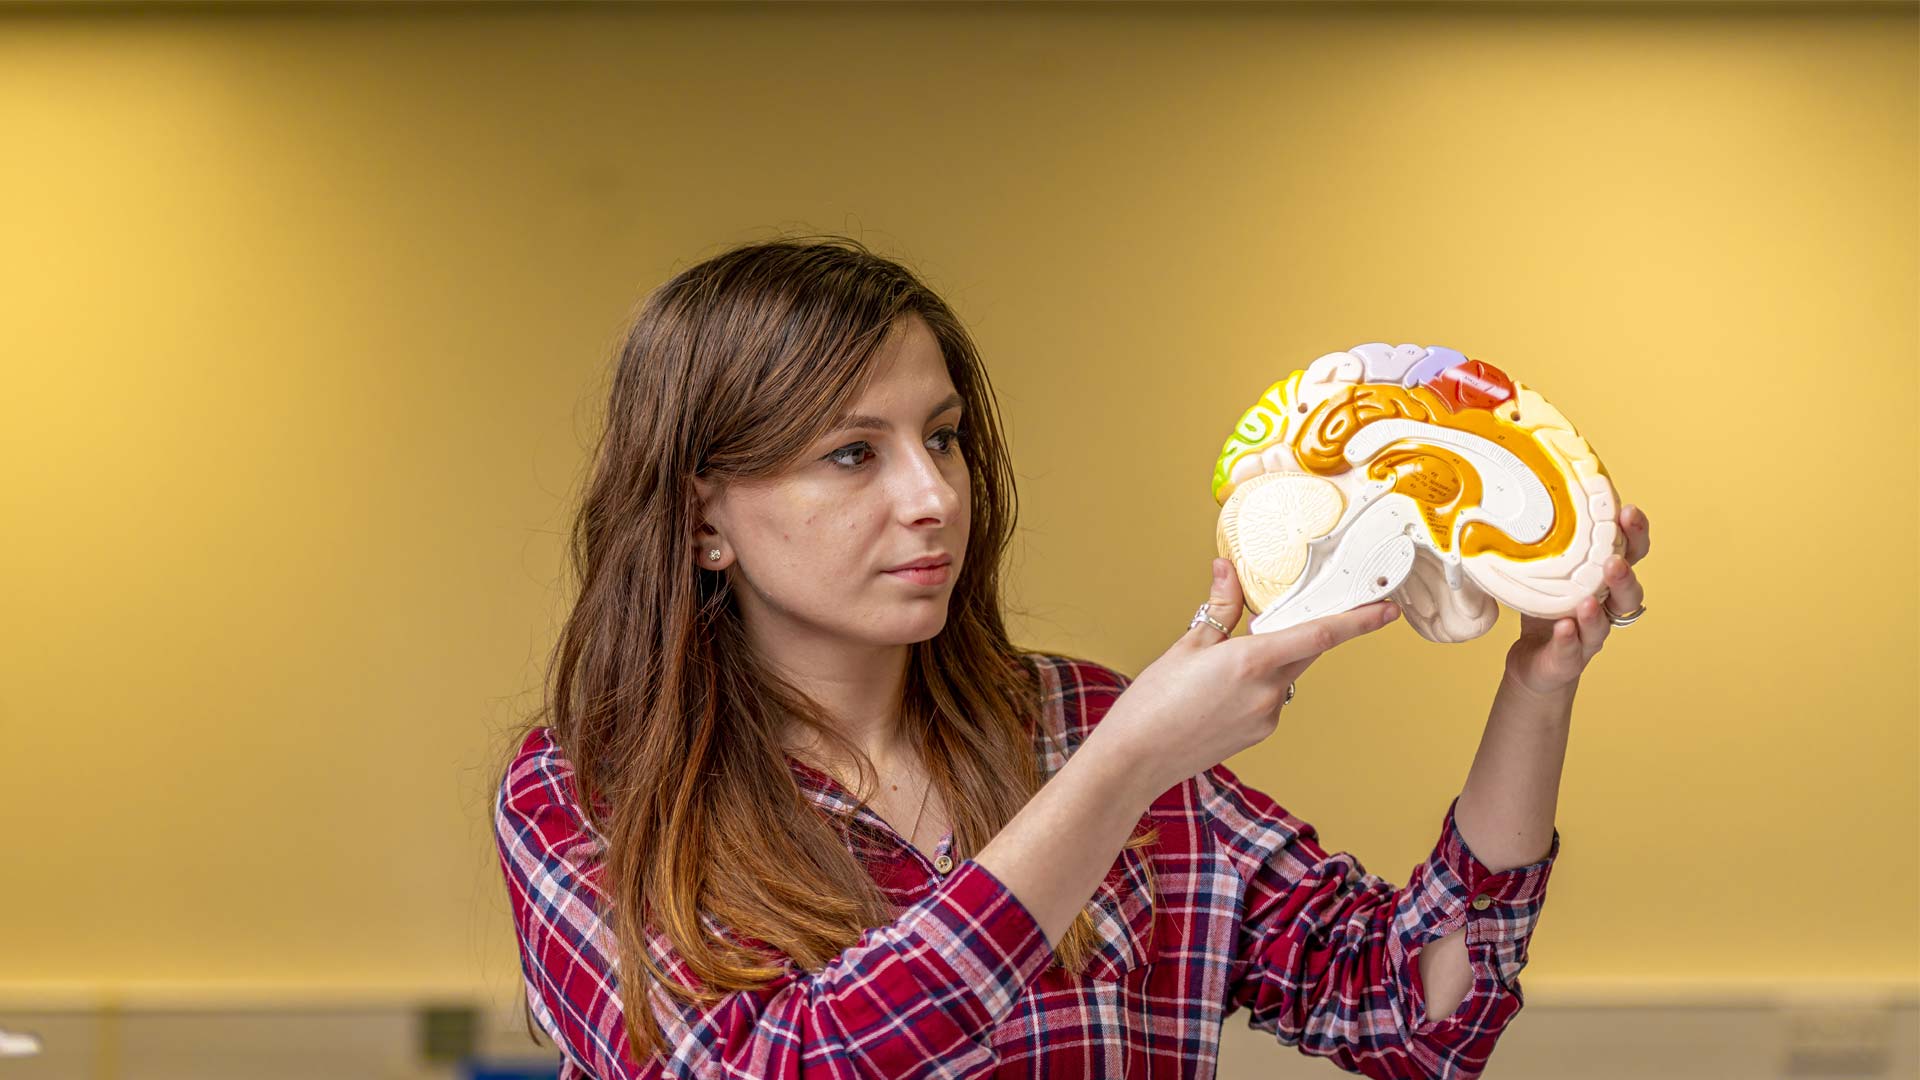 Woman holding a model of a brain